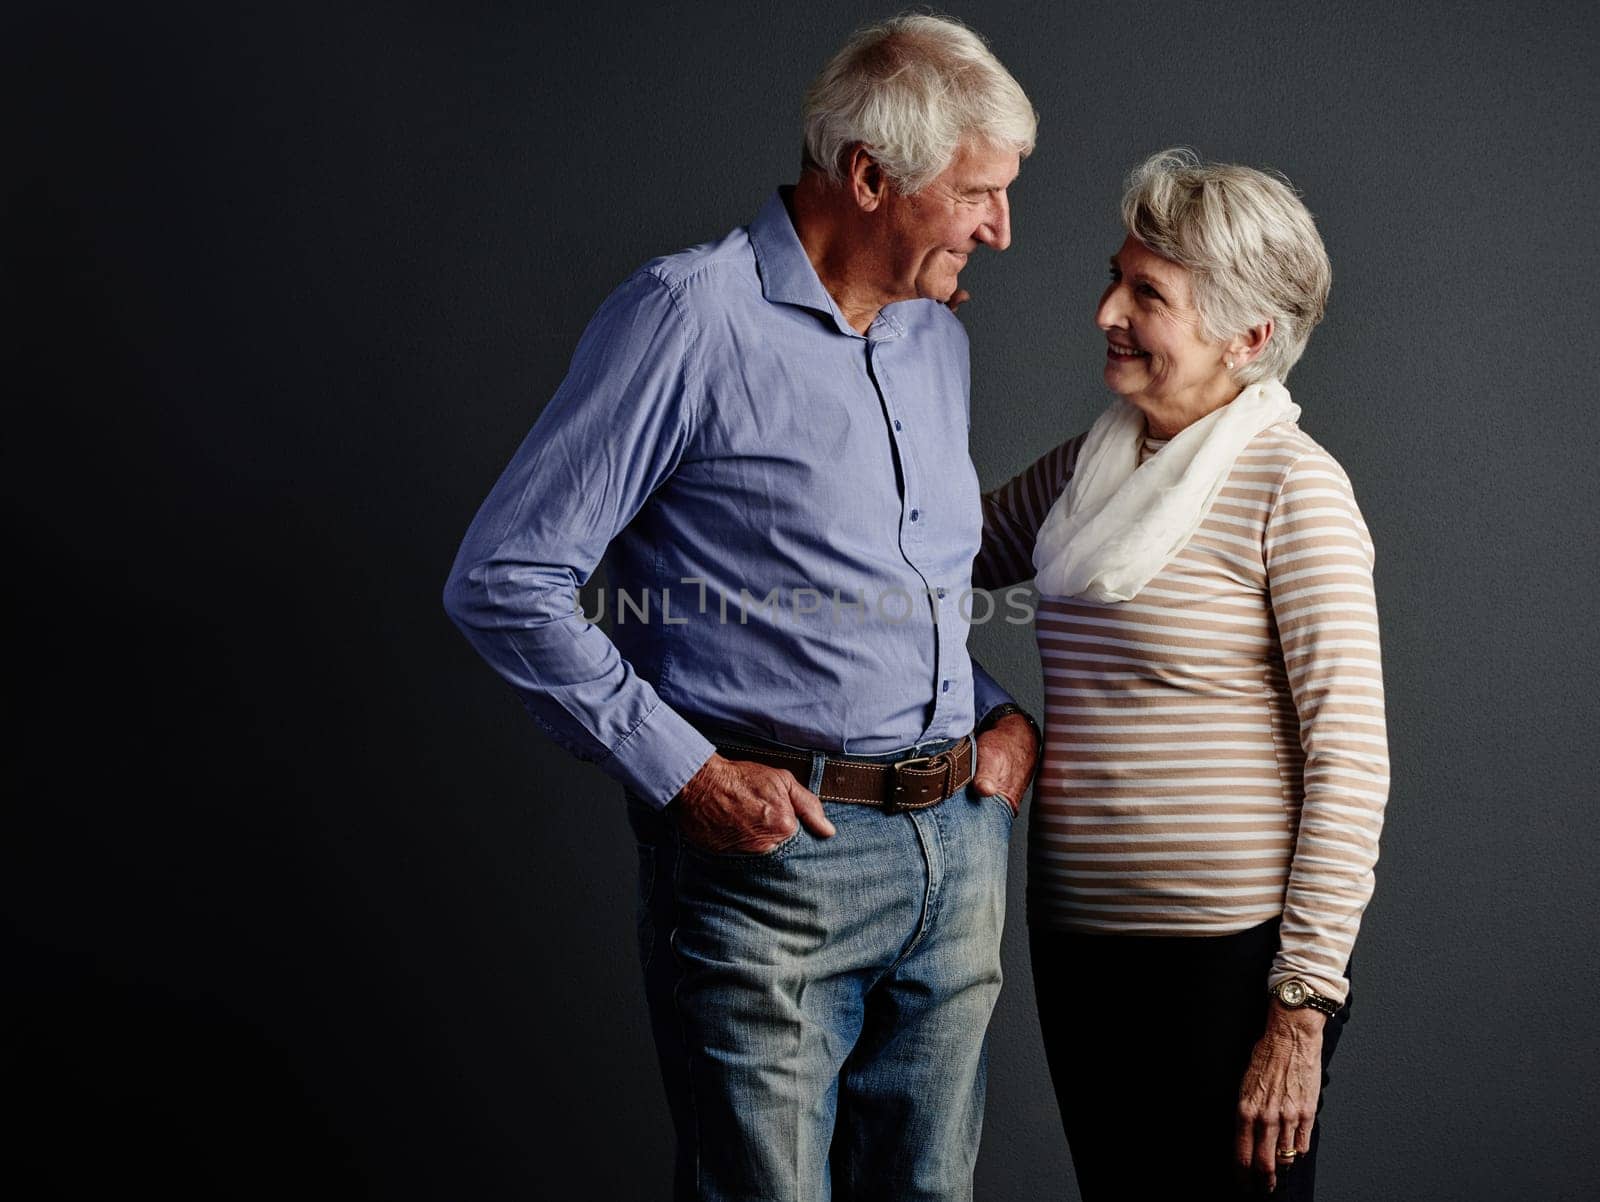 Gazing deeply into her eyes. Studio shot of an affectionate senior couple posing against a grey background